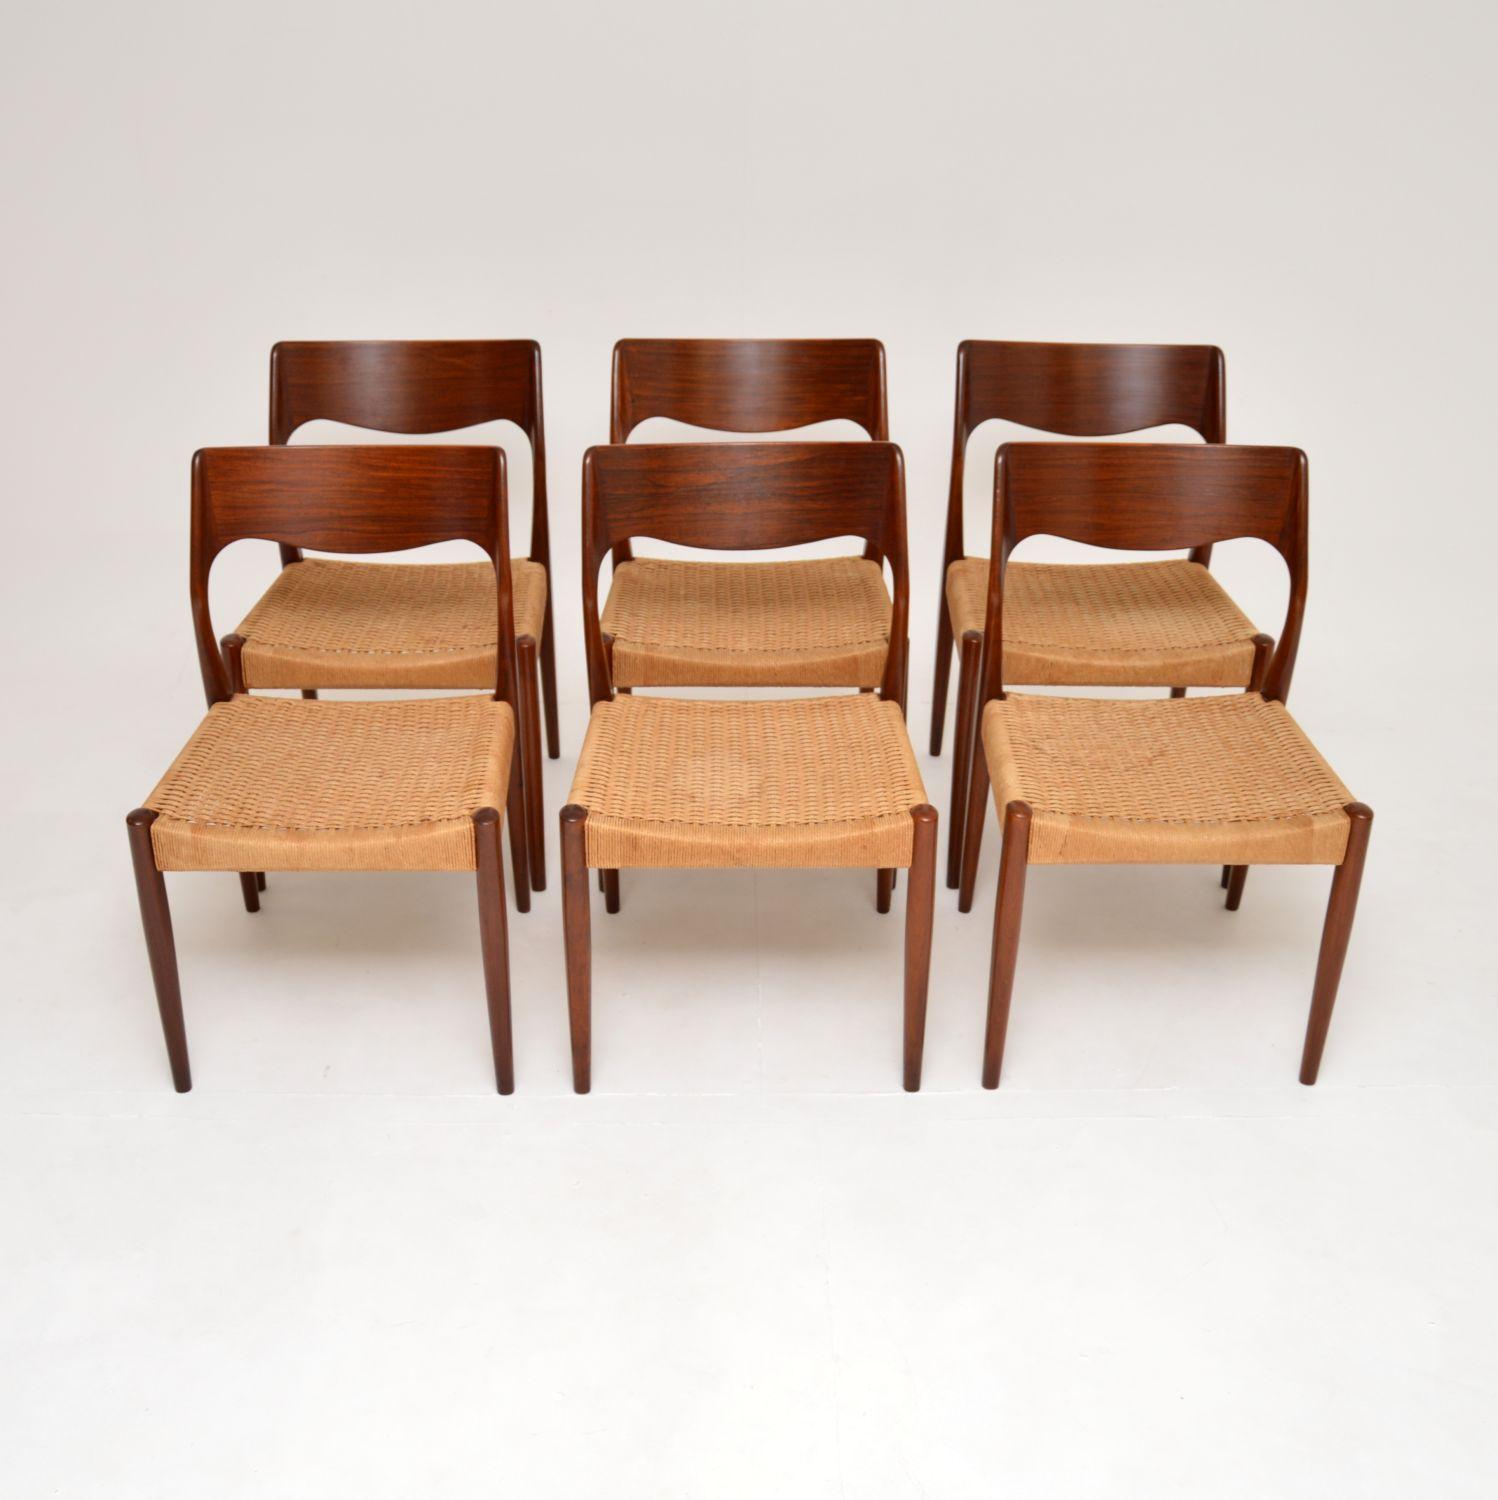 Mid-20th Century Set of 6 Danish Vintage Dining Chairs by Arne Hovmand-Olsen For Sale